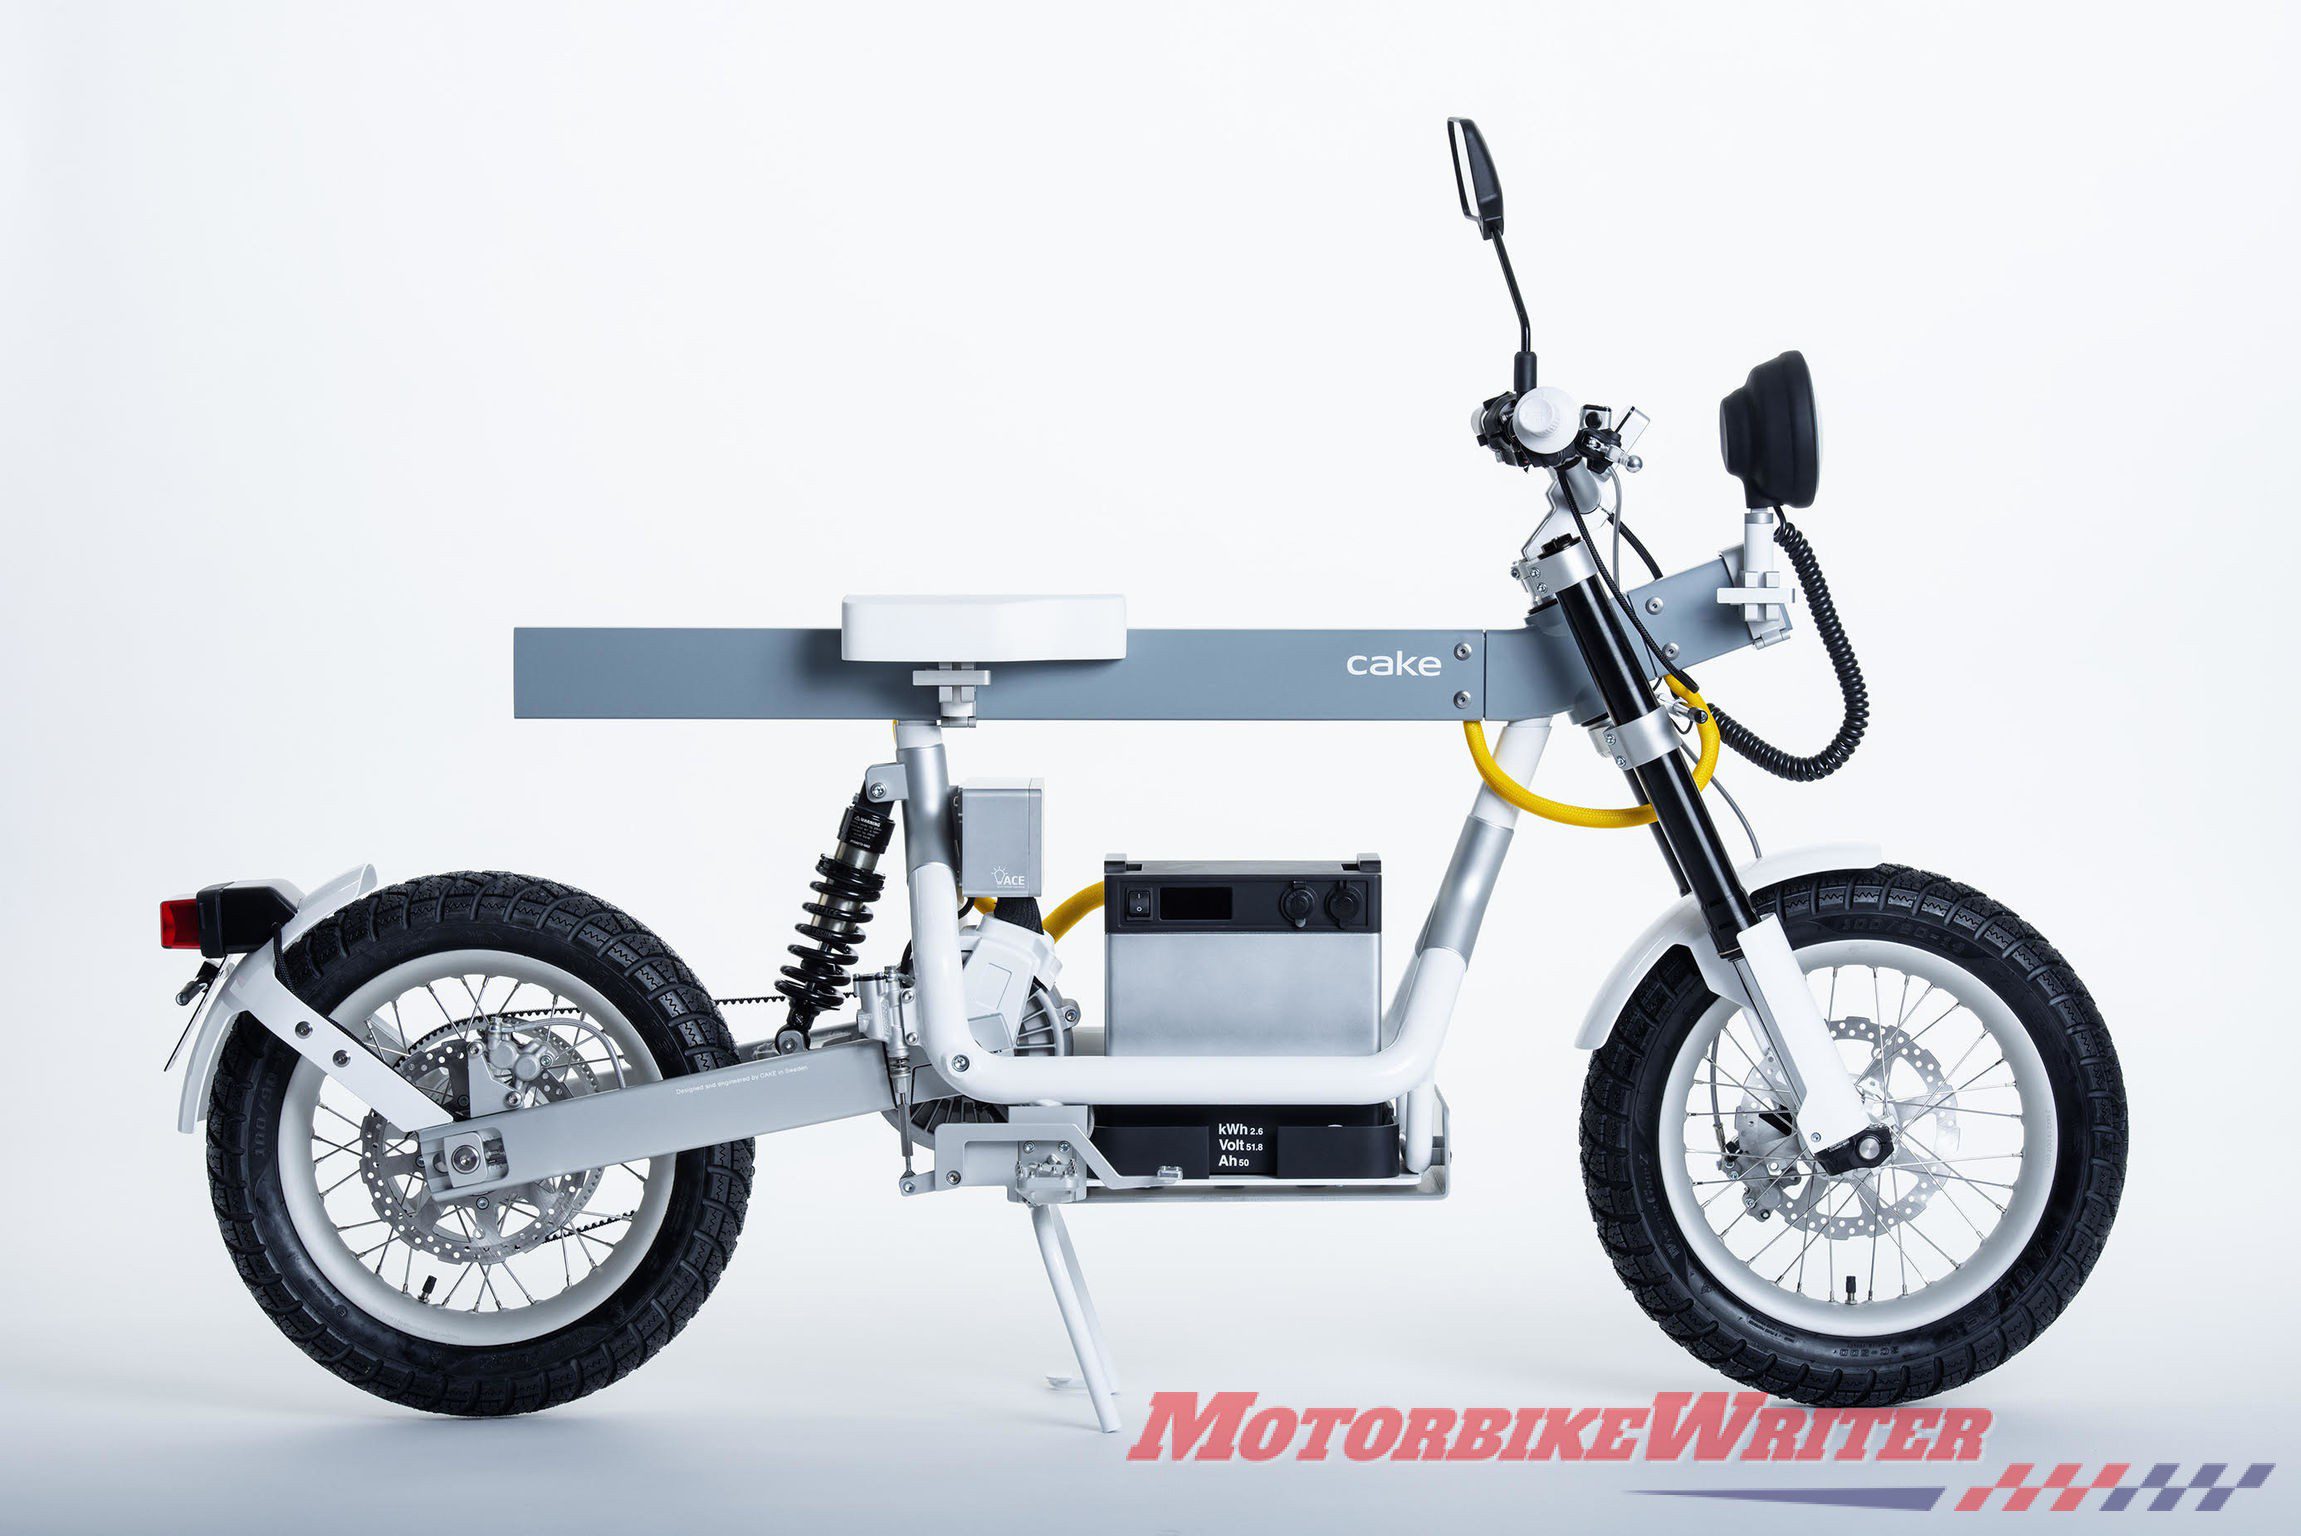 An electric commuter/off-road motorcycle, a concept electric BMW and the new Yamaha Ténéré 700 adventure bike have been honoured with international iF Design Awards.